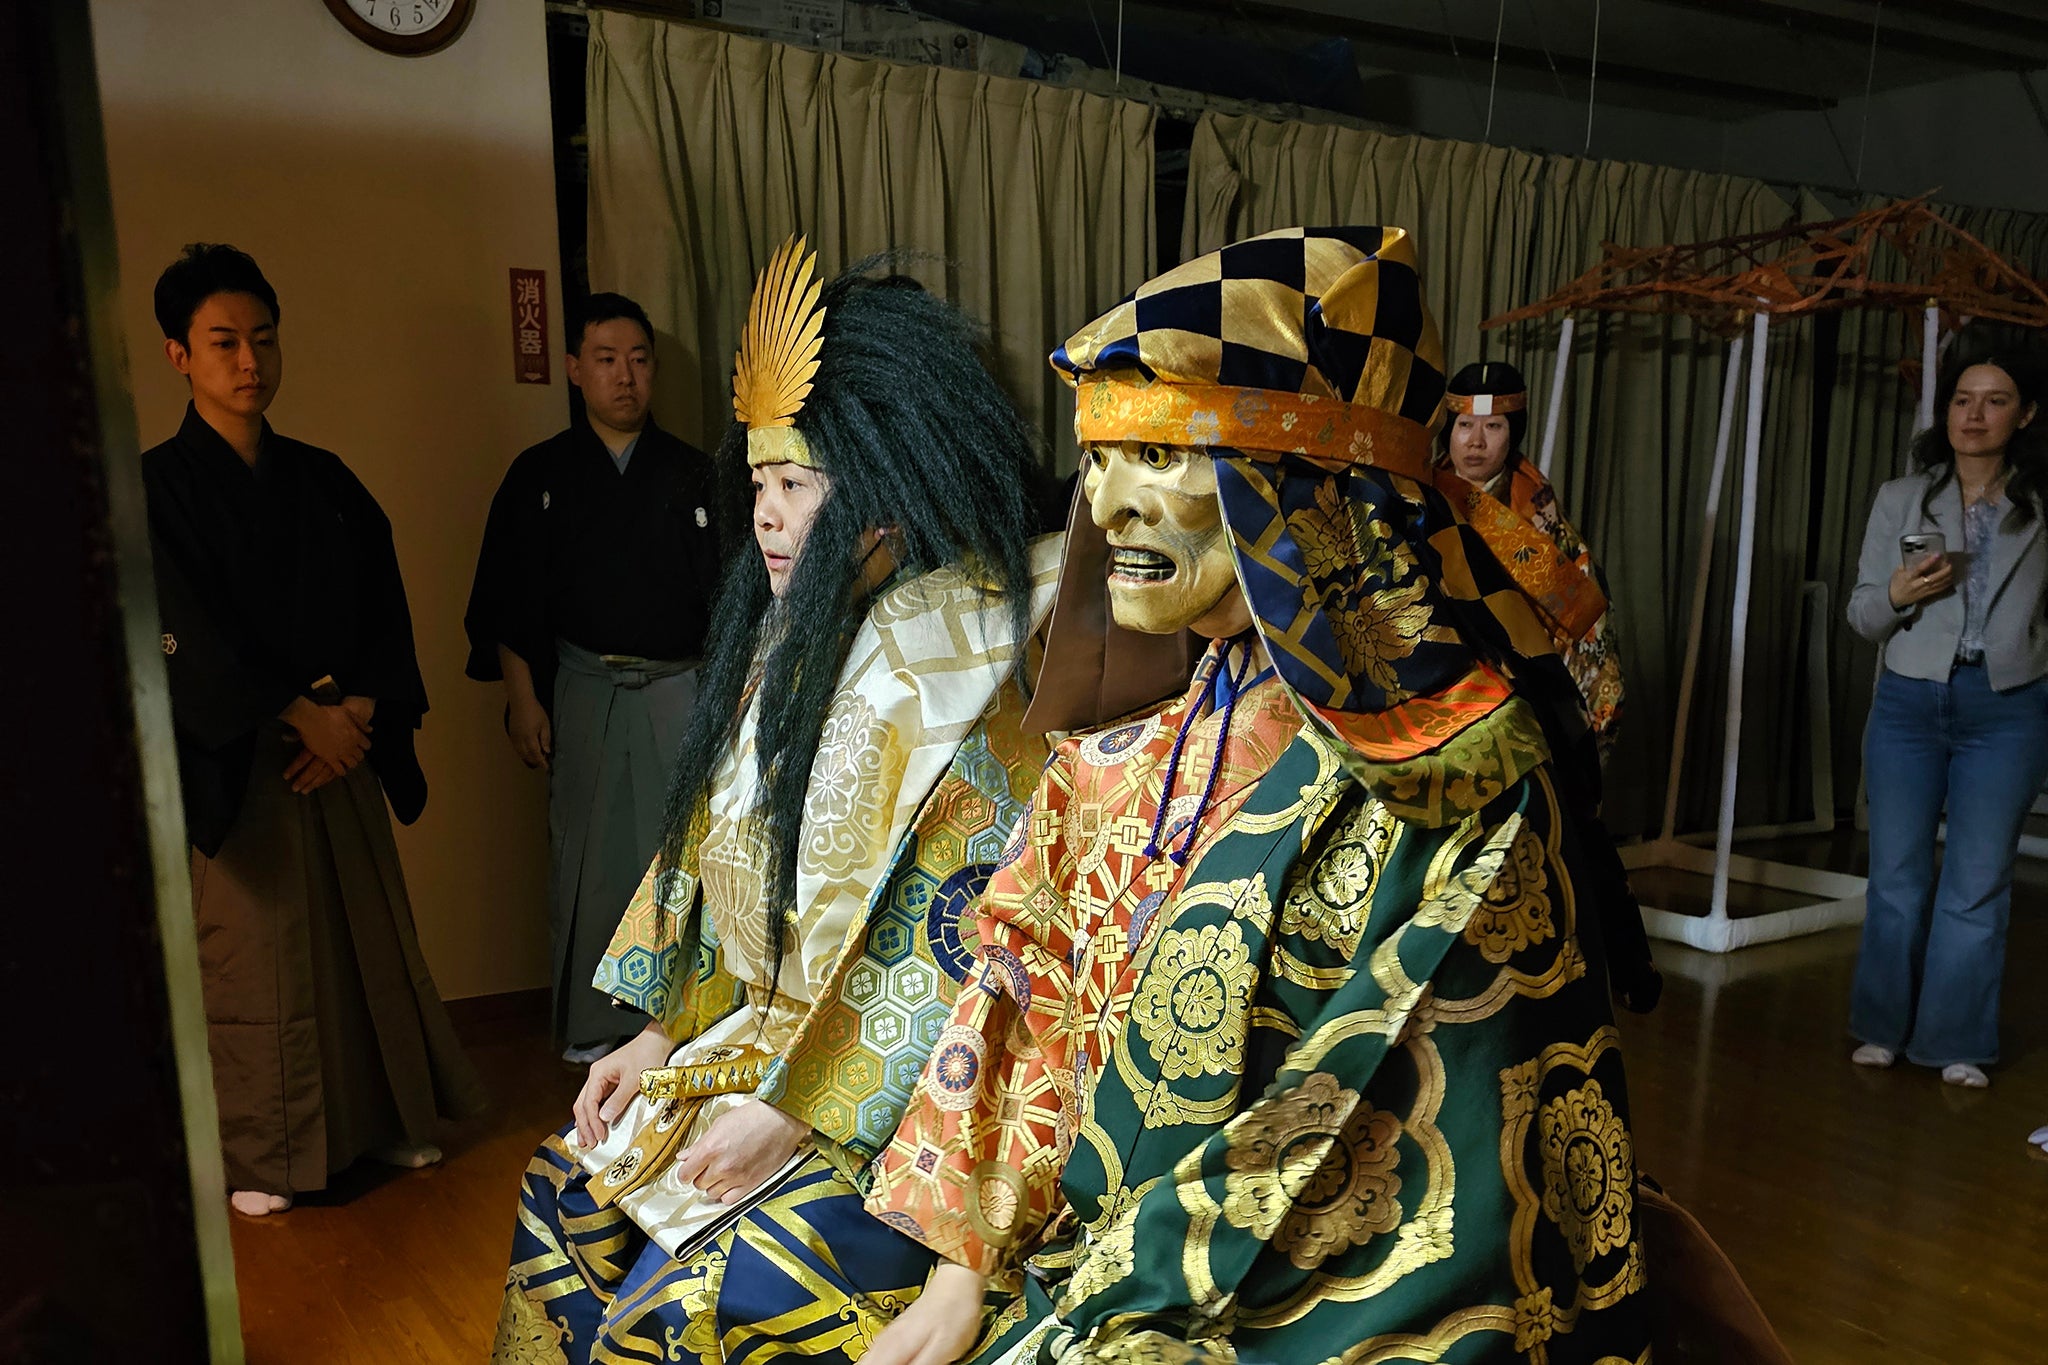 Behind the scenes at the Noh theatre